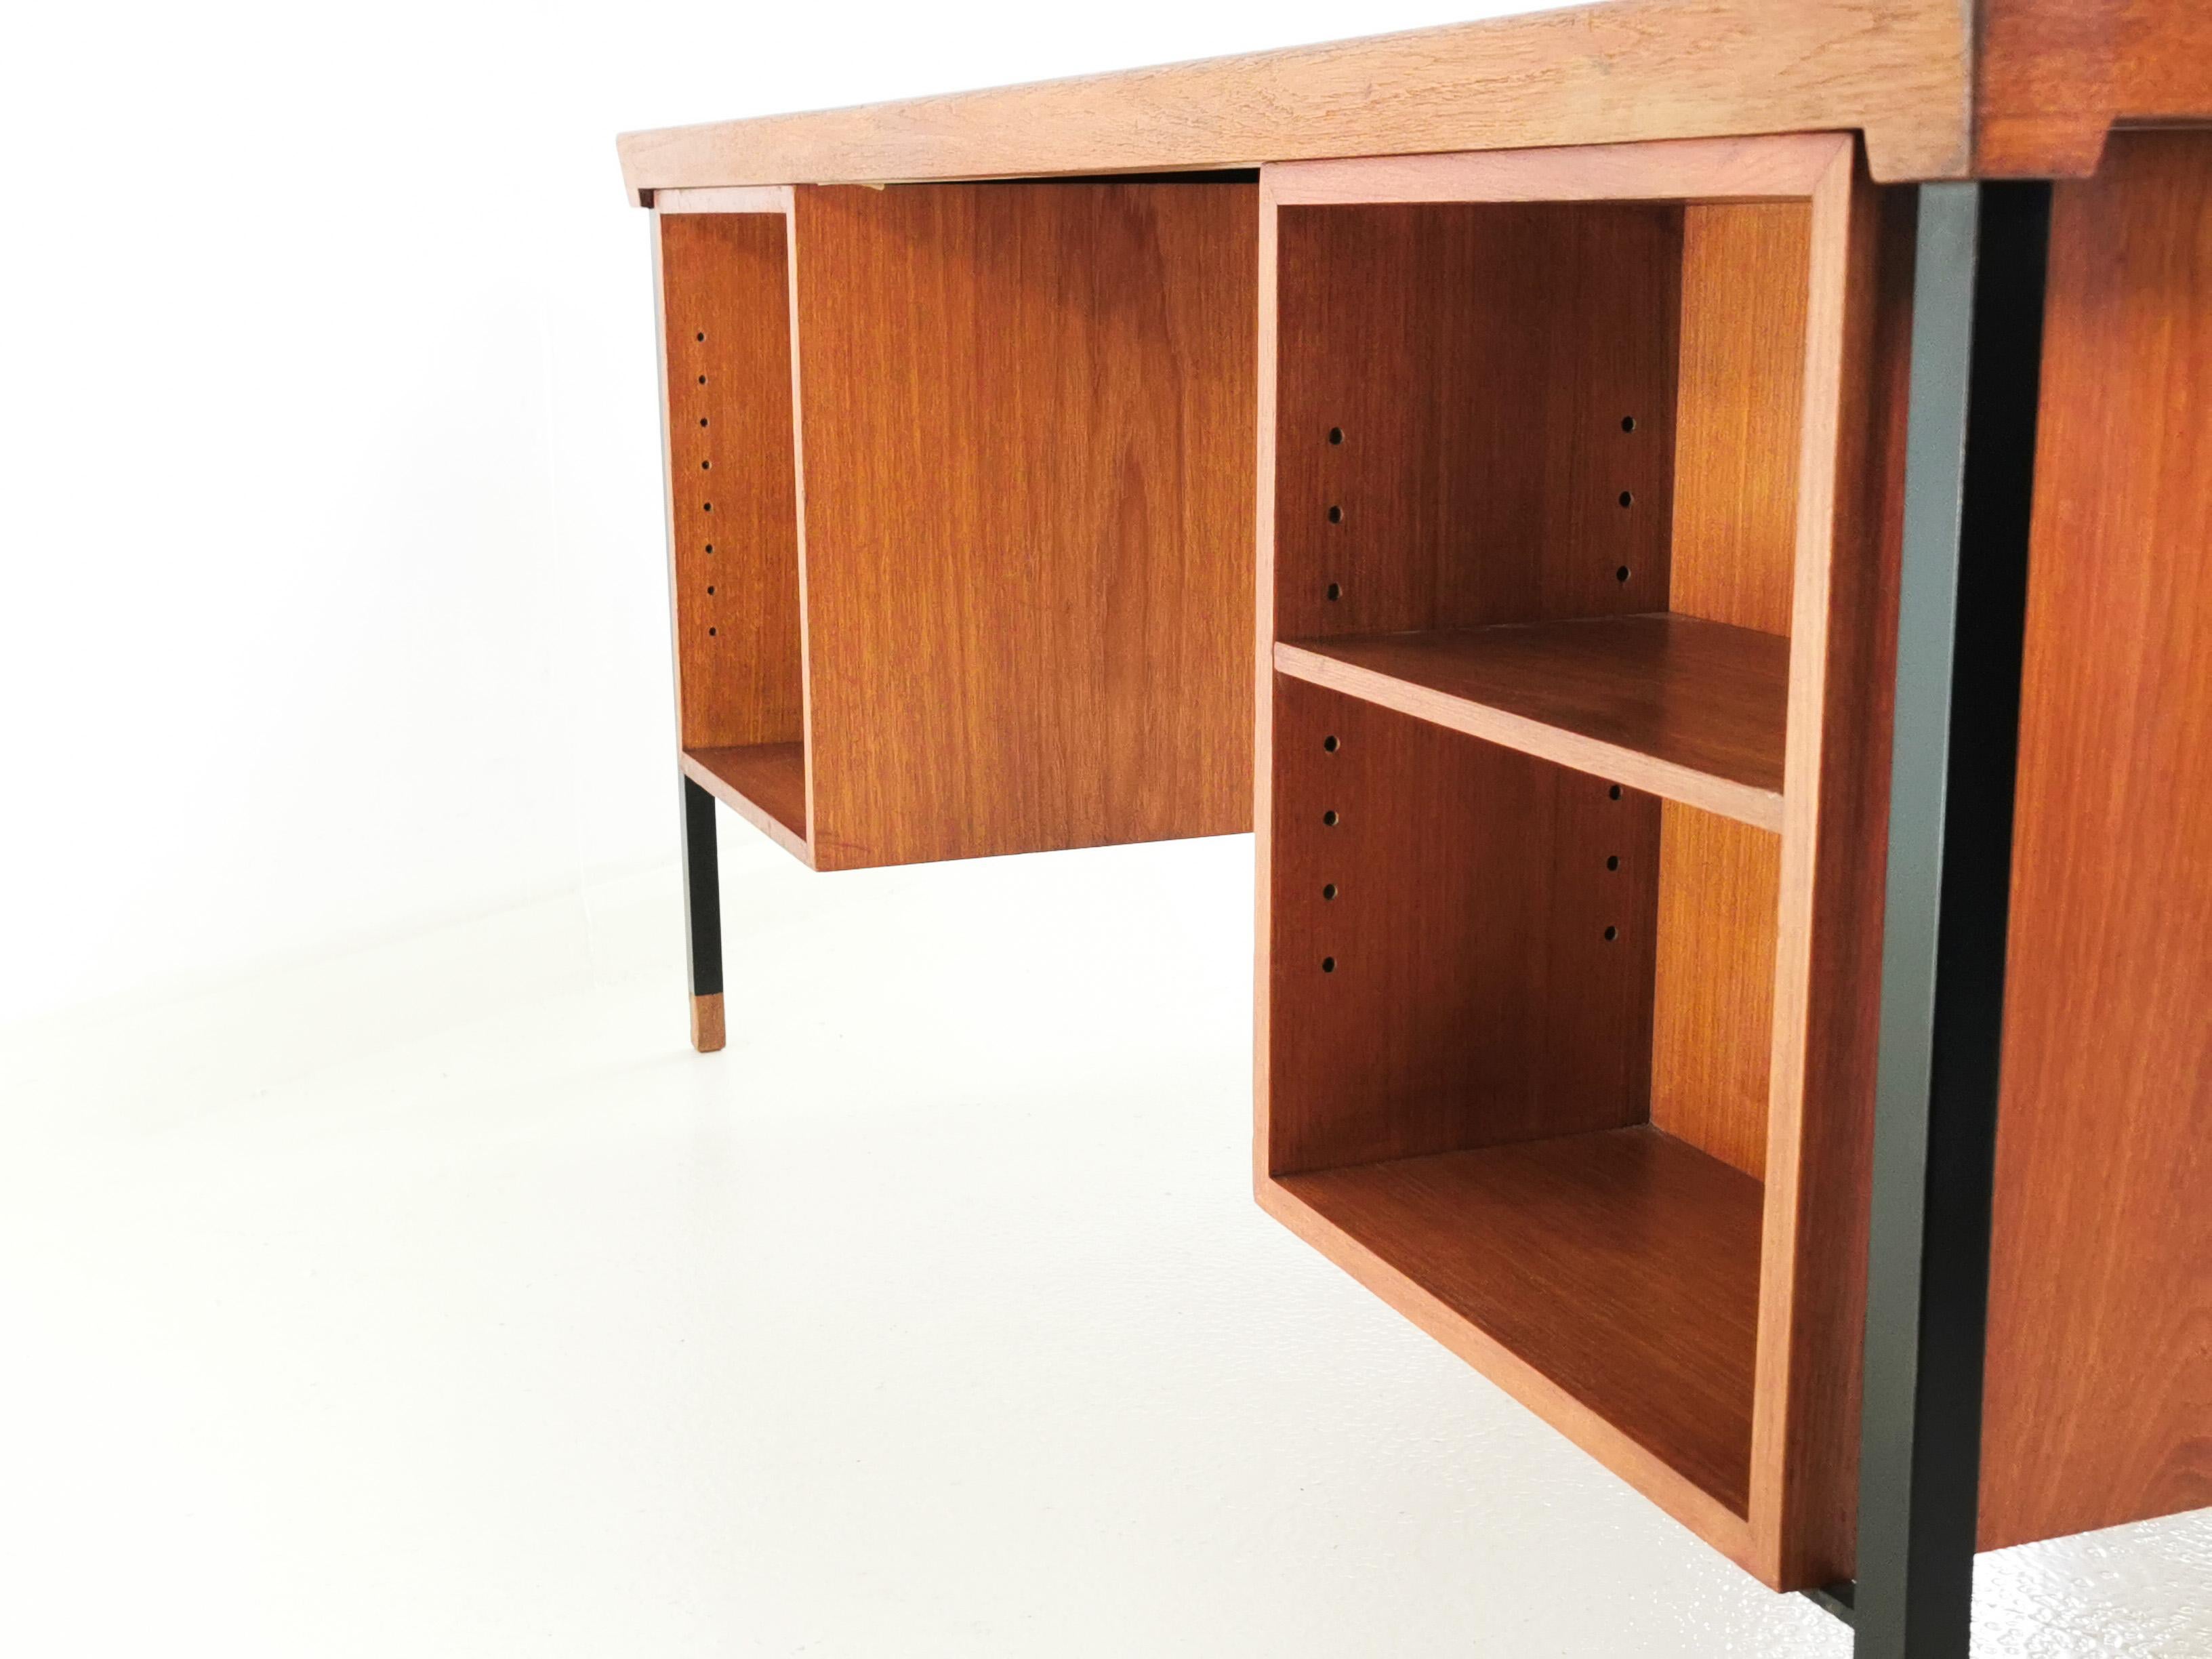 A teak desk designed by Peter Hvidt and Orla Molgaard-Nielsen for Soborg Mobelfabrik, circa 1960s made in Denmark to a Scandinavian design. The desk has six drawers with small removable organisation trays, two of the trays slide out entirely. The